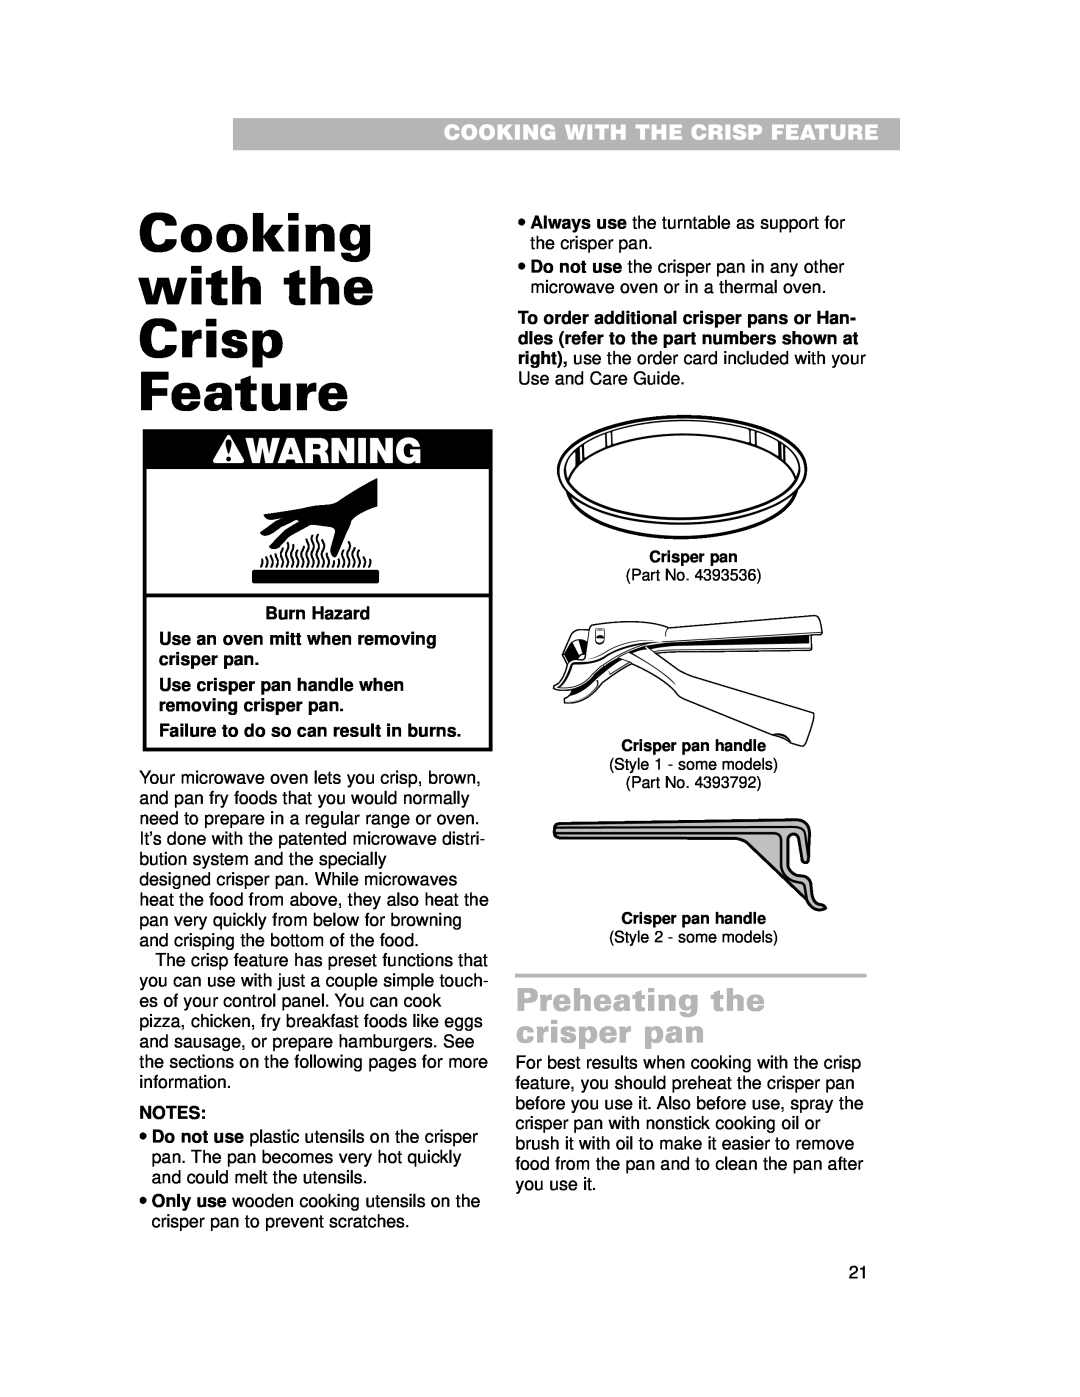 Whirlpool CMT102SG Cooking with the Crisp Feature, Preheating the crisper pan, Cooking With The Crisp Feature, wWARNING 